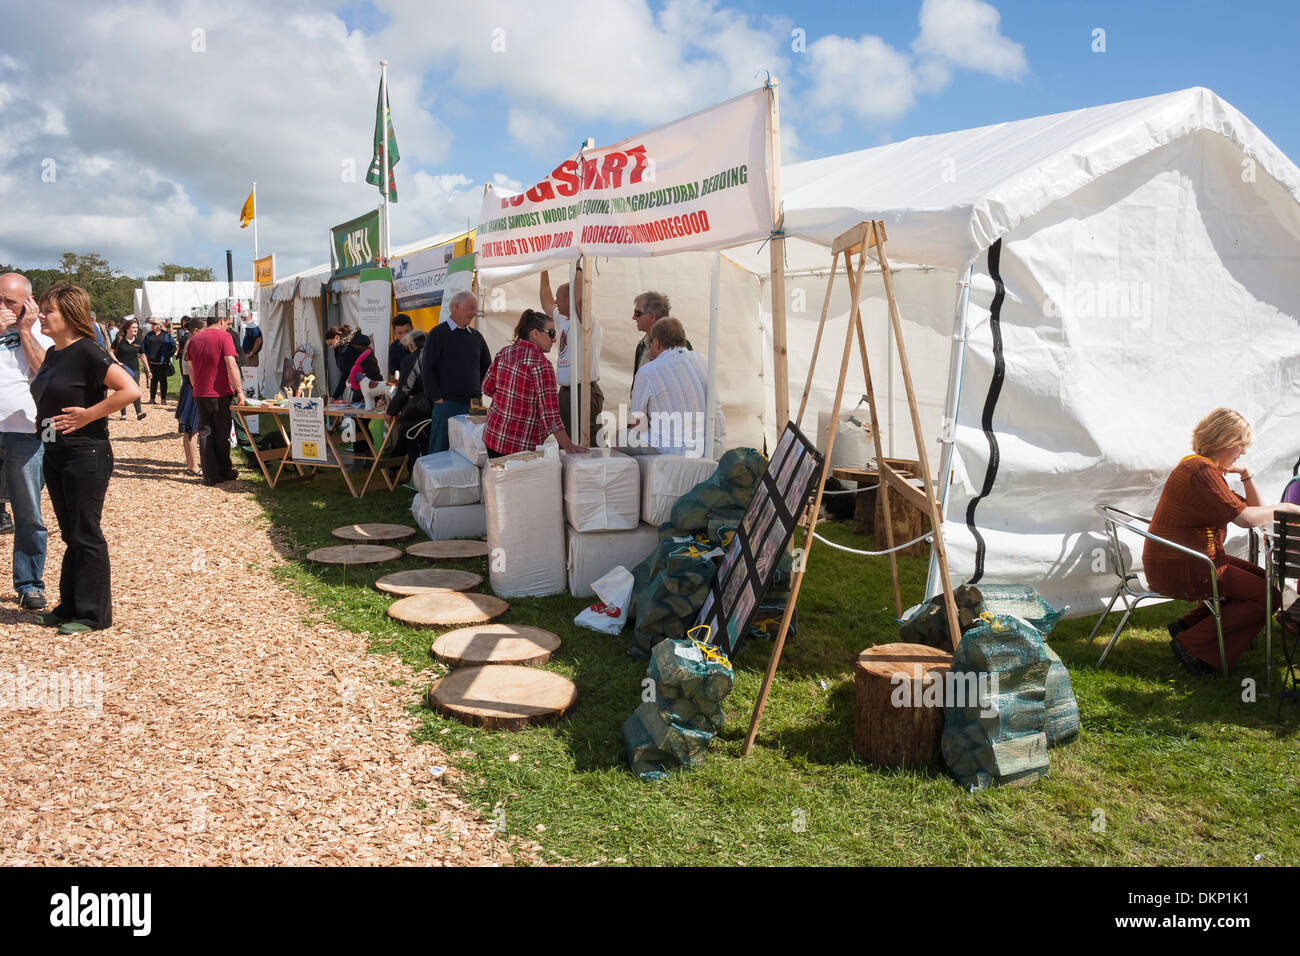 Trade stands tents at agricultural show Stock Photo